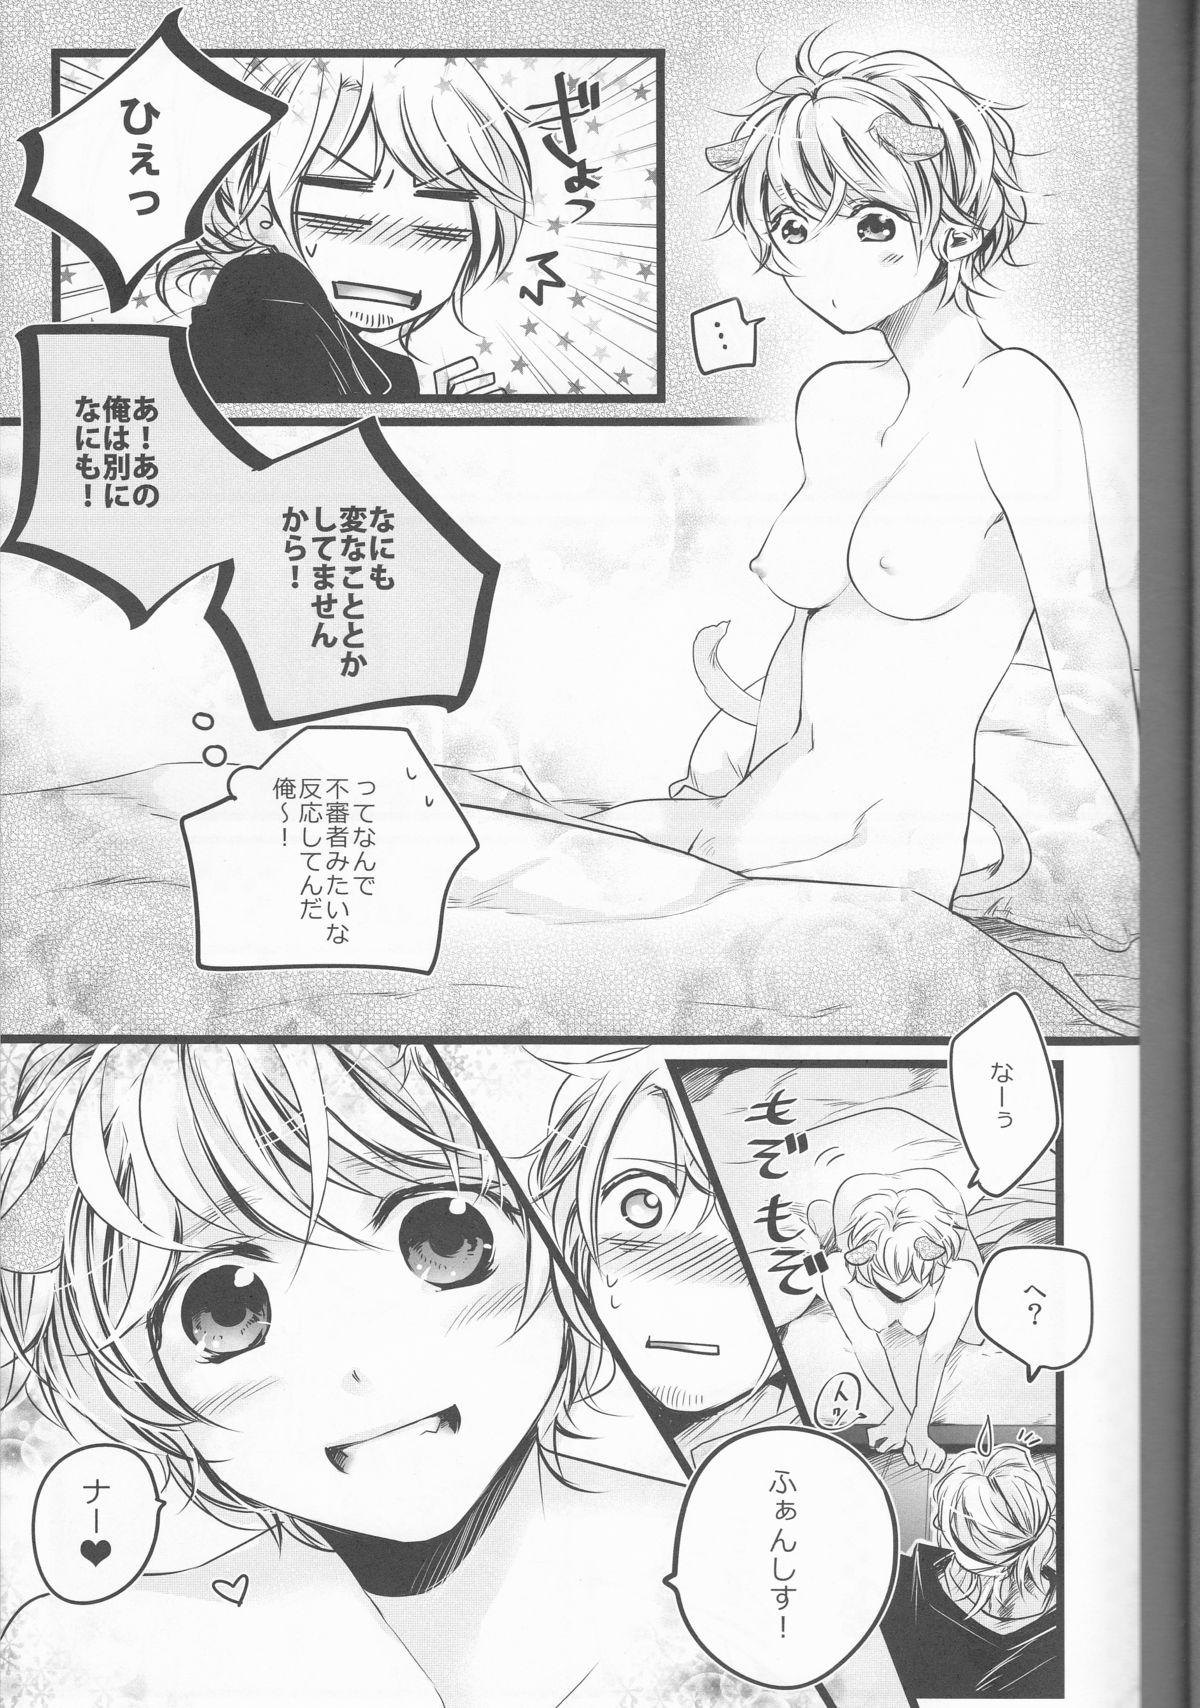 Lesbians ]Bell the cat! - Axis powers hetalia Rubia - Page 8